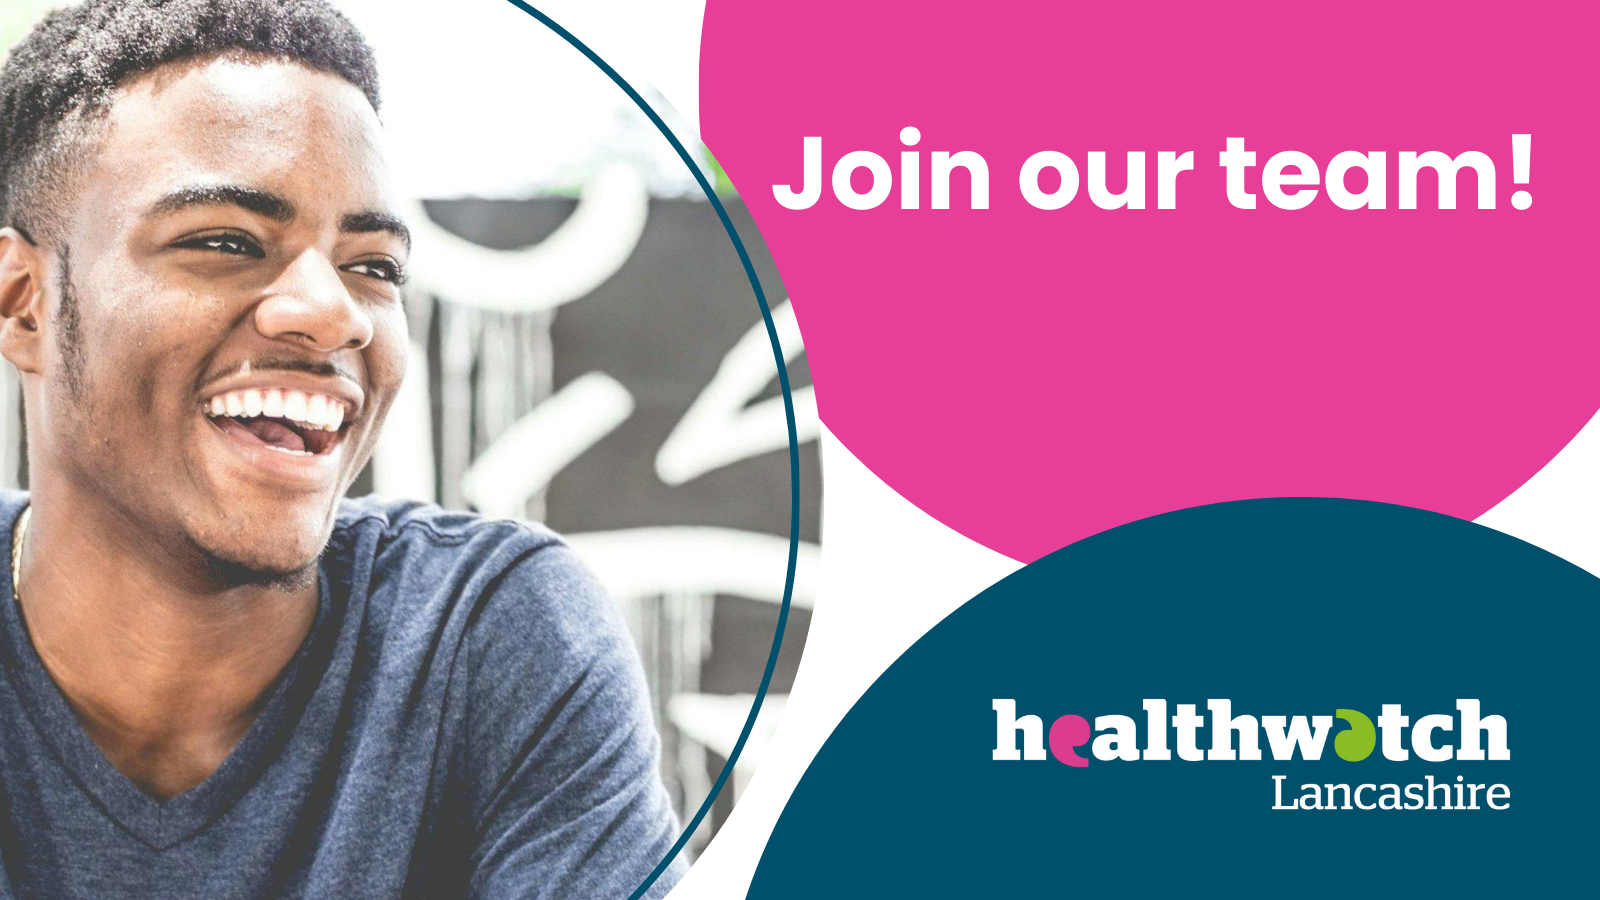 Healthwatch Lancashire Join our team